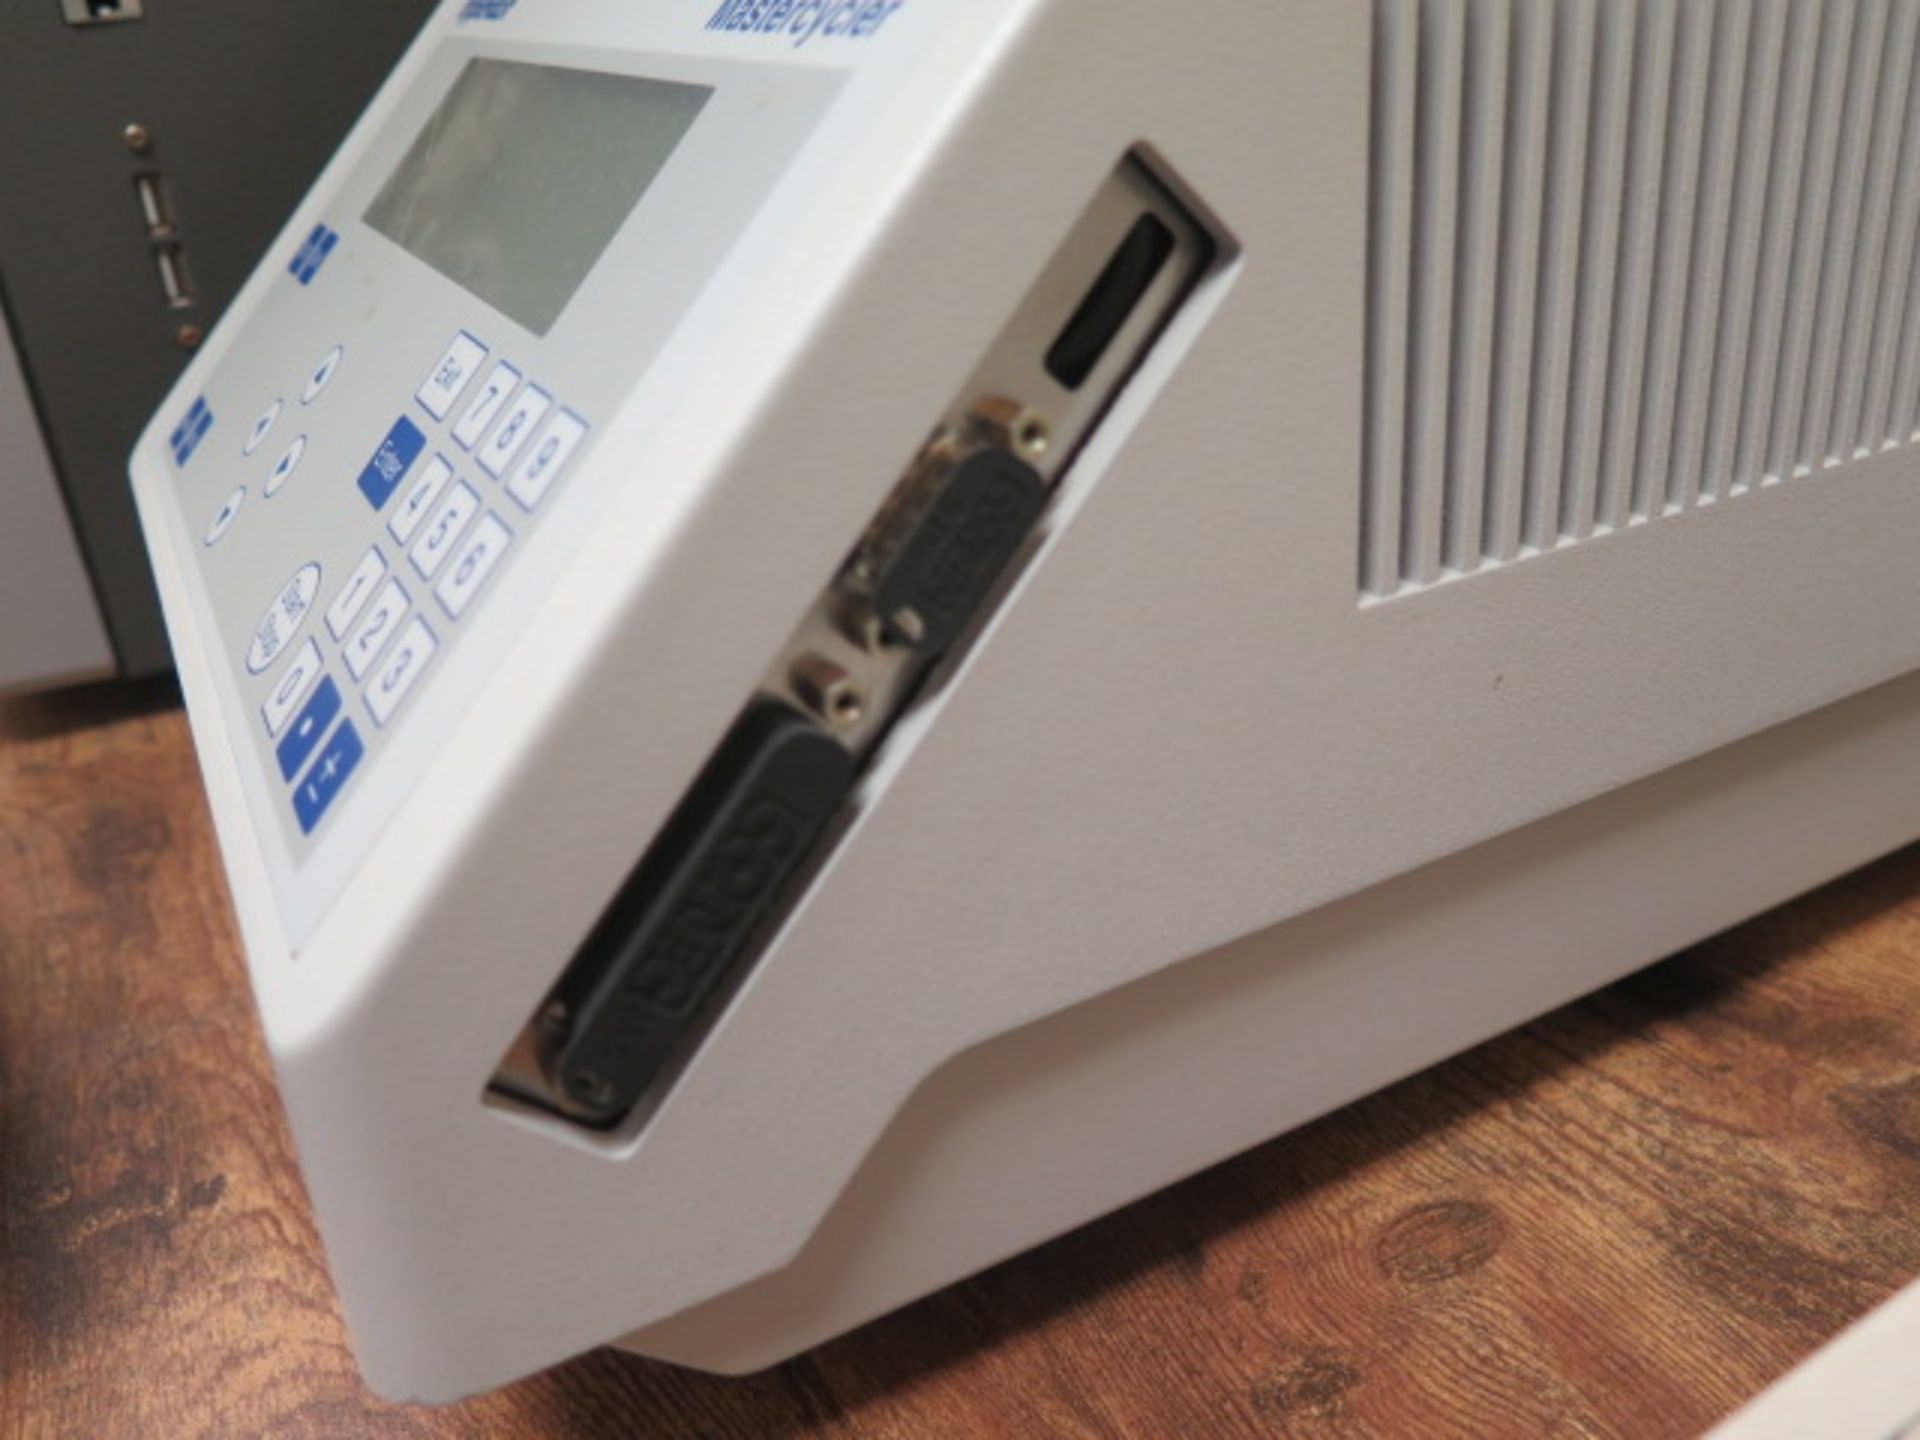 Eppendorf “Mastercycler” Thermocycler (SOLD AS-IS - NO WARRANTY) - Image 4 of 6